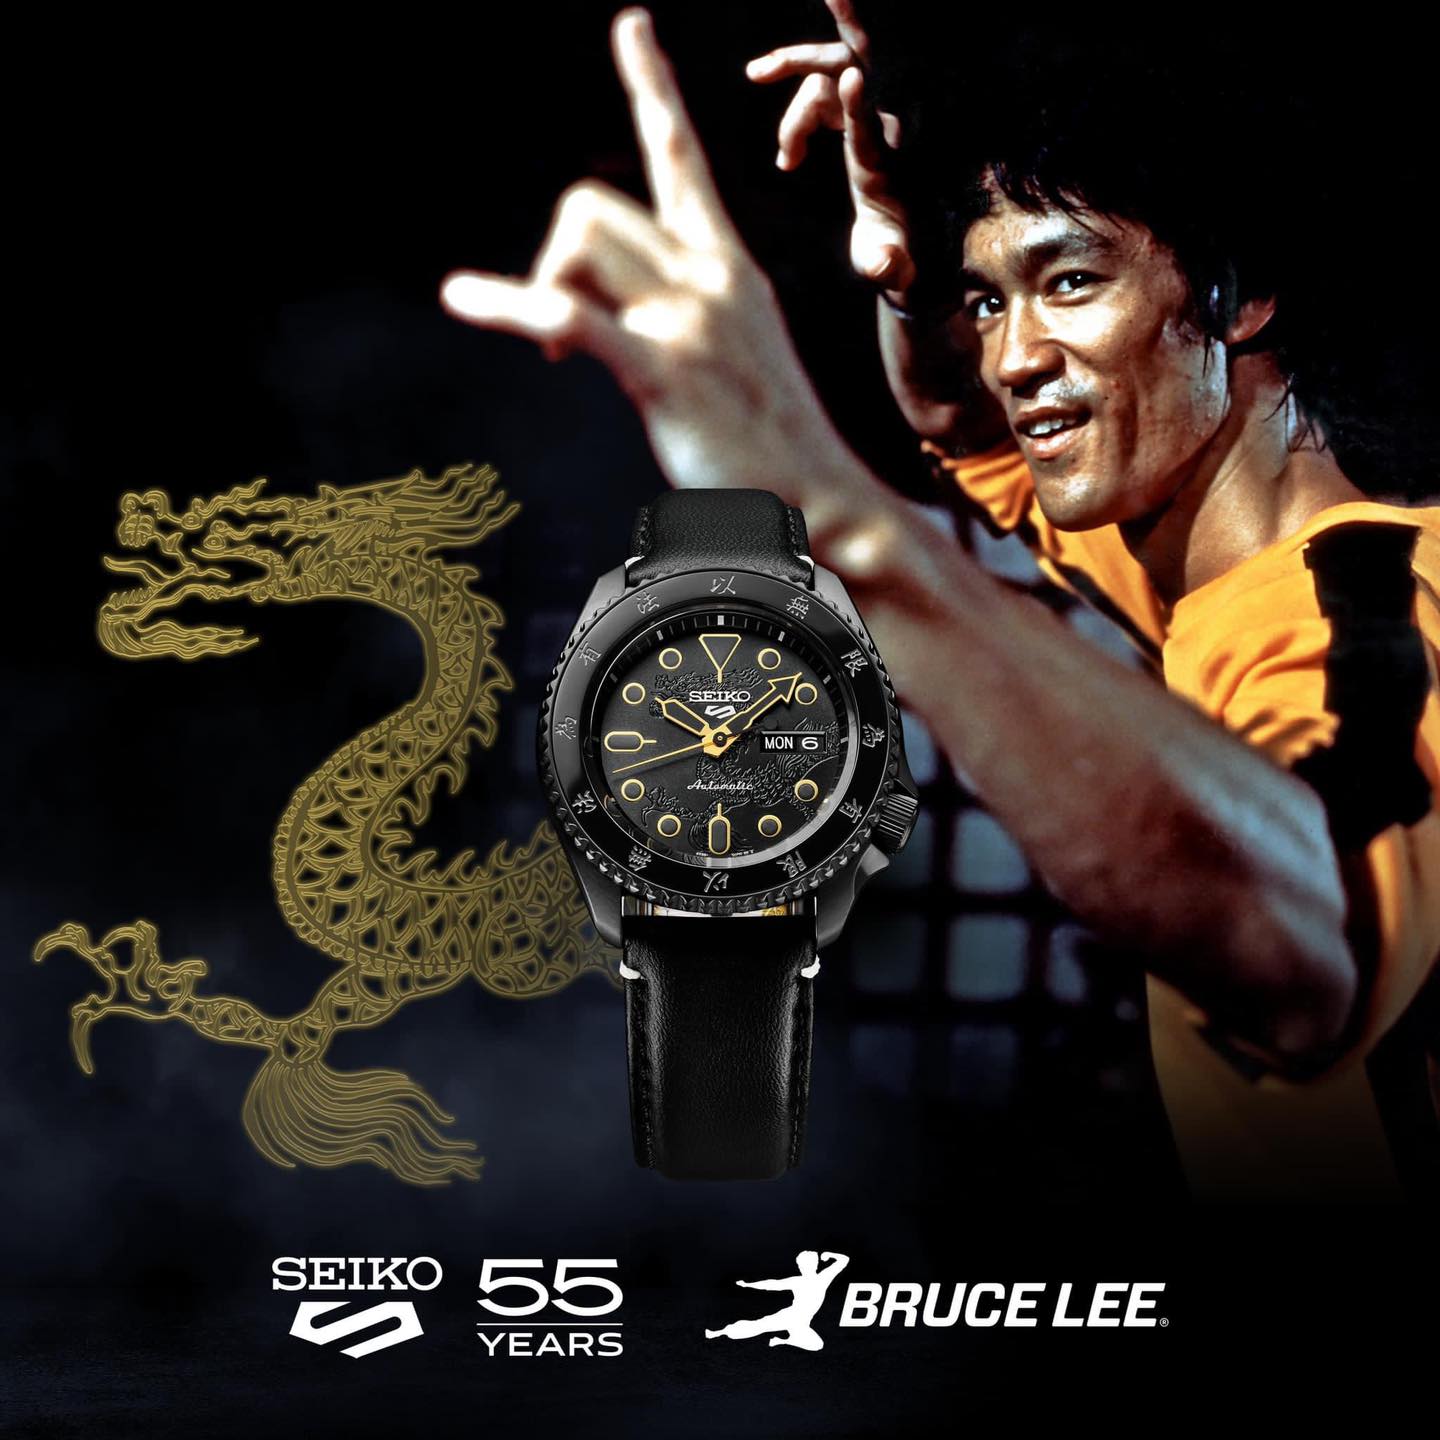 Seiko 5 Sports Bruce Lee Limited Edition Watch